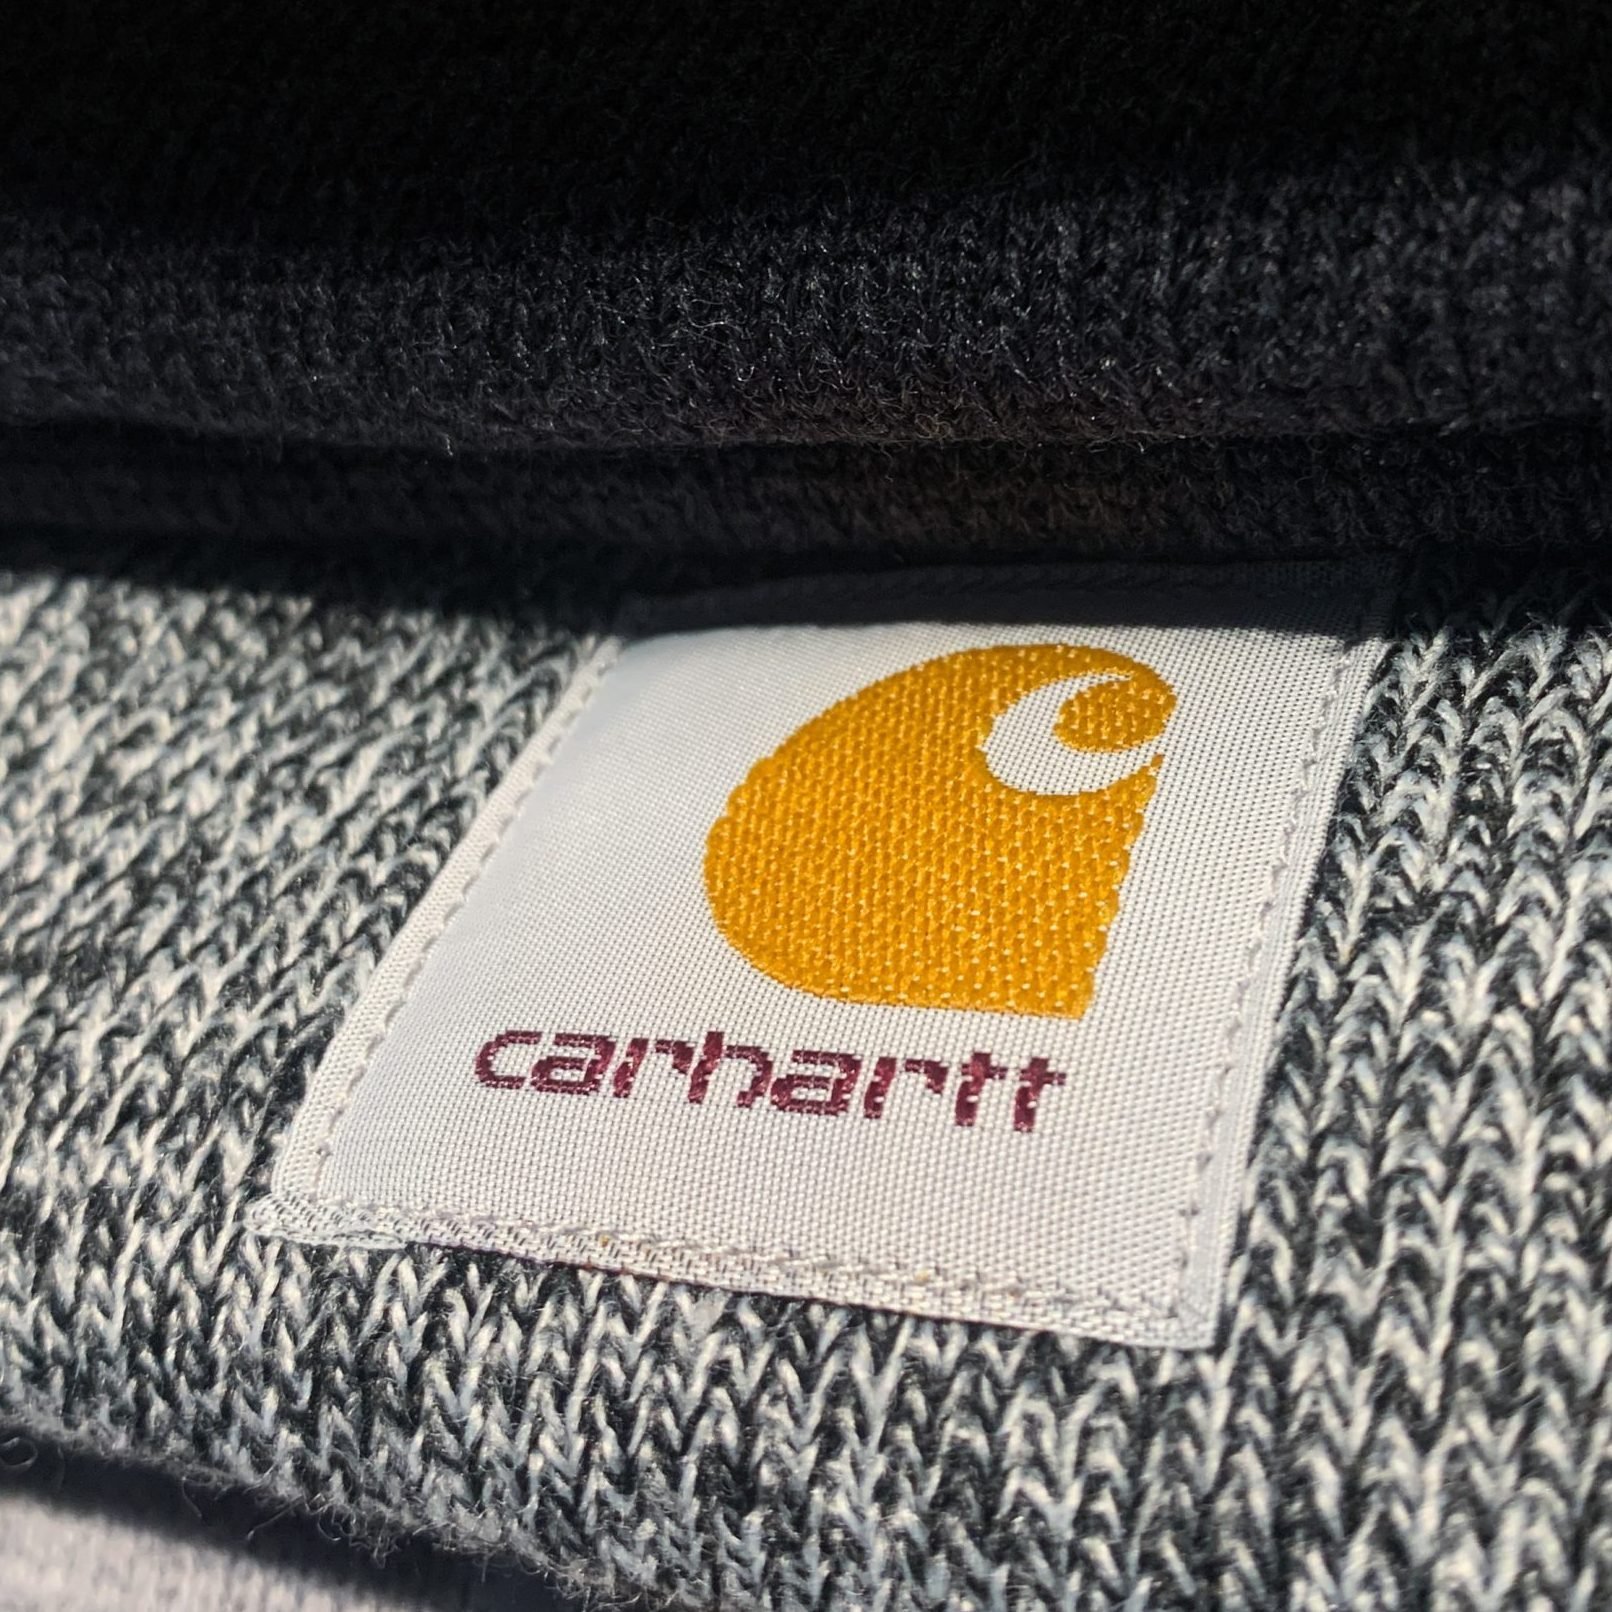 Carhartt's Bestselling Cargo Pants Are 60% Off During This Rare Sale